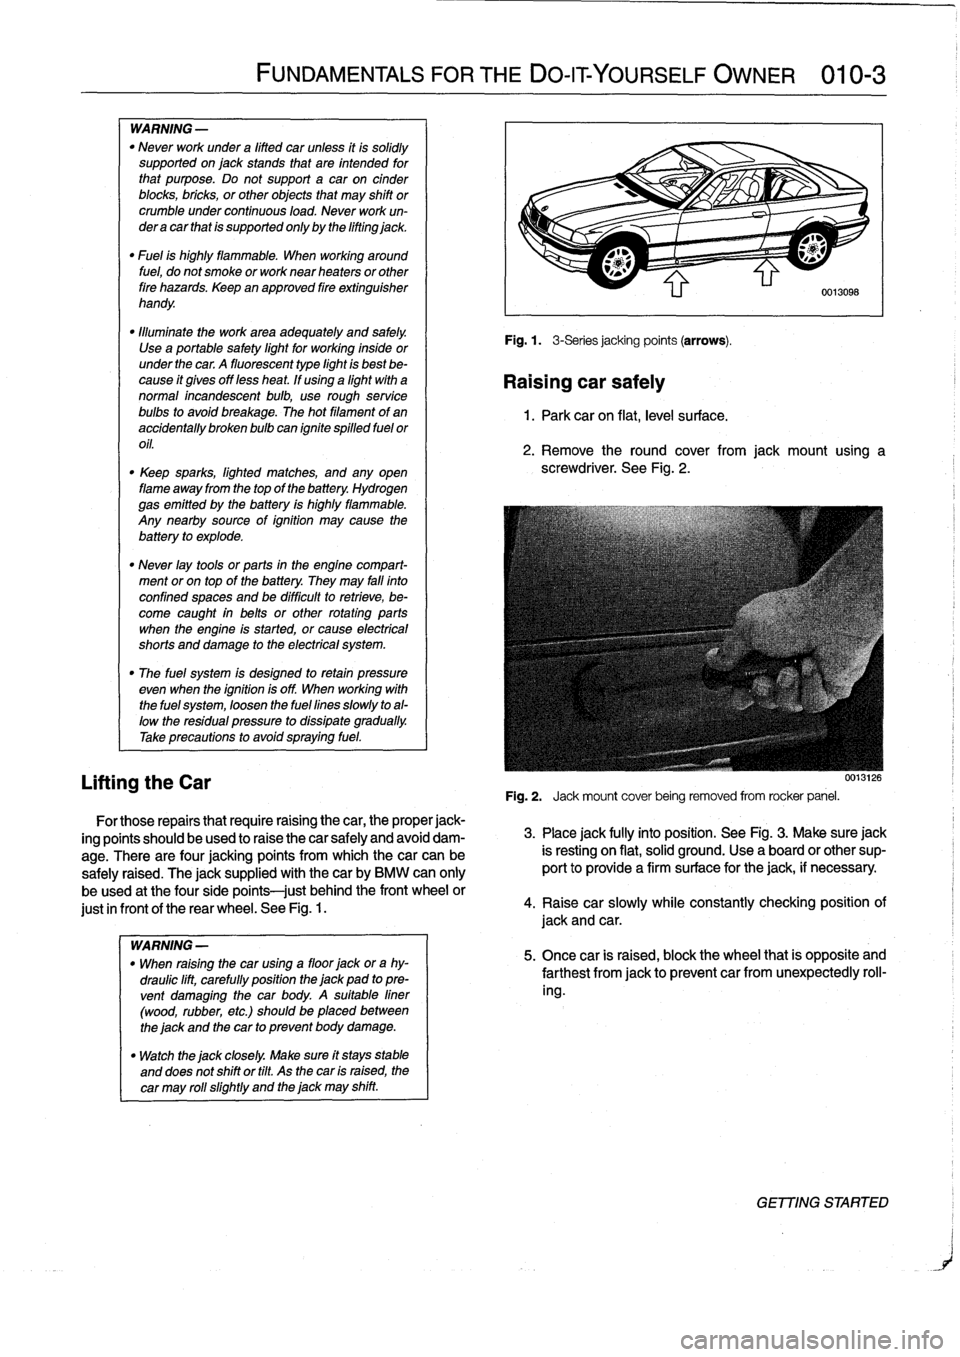 BMW 328i 1998 E36 Workshop Manual 
WARNING
-

"
Never
work
under
a
lifted
car
unless
it
is
solidly
supported
on
jack
stands
that
are
intended
for
that
purpose
.
Do
not
support
a
car
on
cinder
blocks,
bricks,
or
other
objects
that
may
